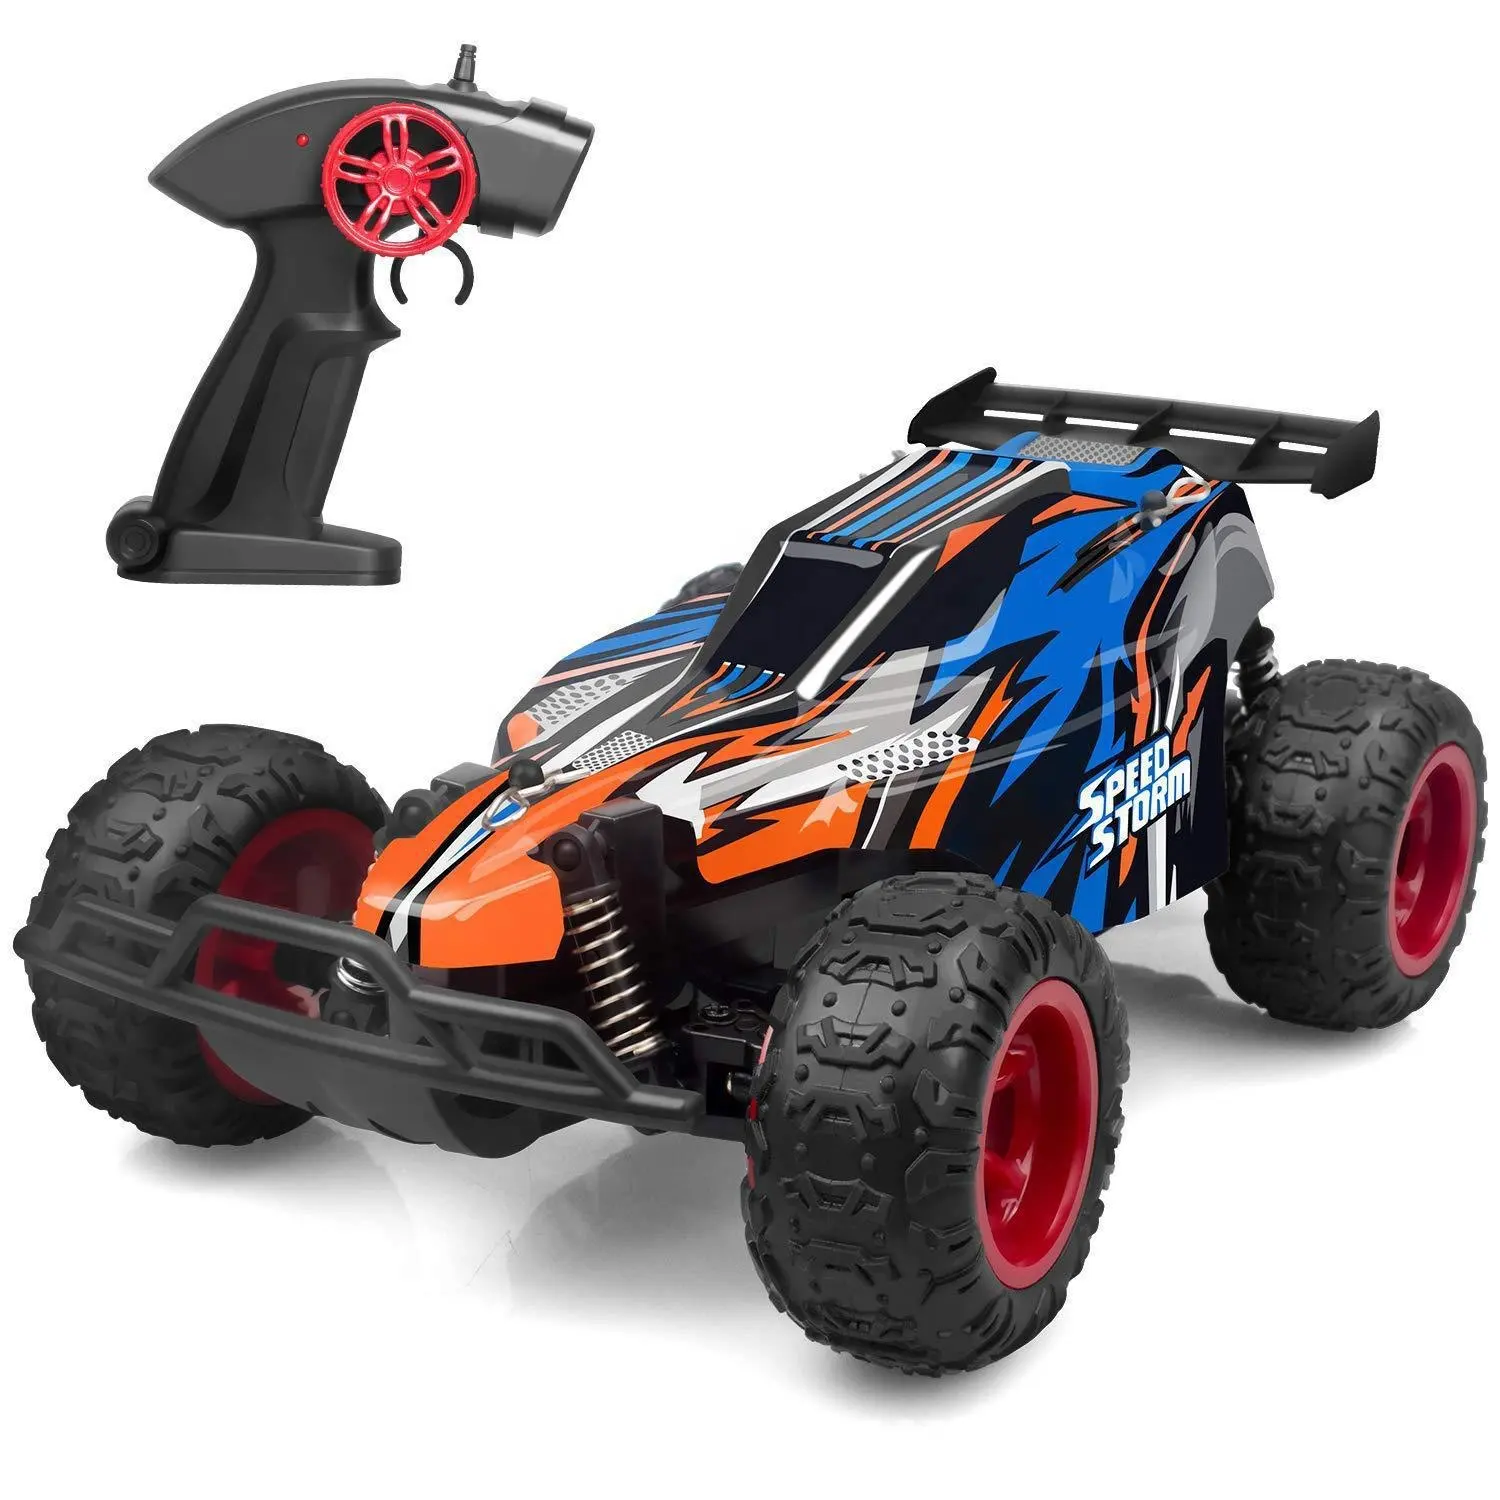 2022 High quality 1:22 kids rc cars for adults children remote control toy buggy 4x4 battery race hobby drift with high speed